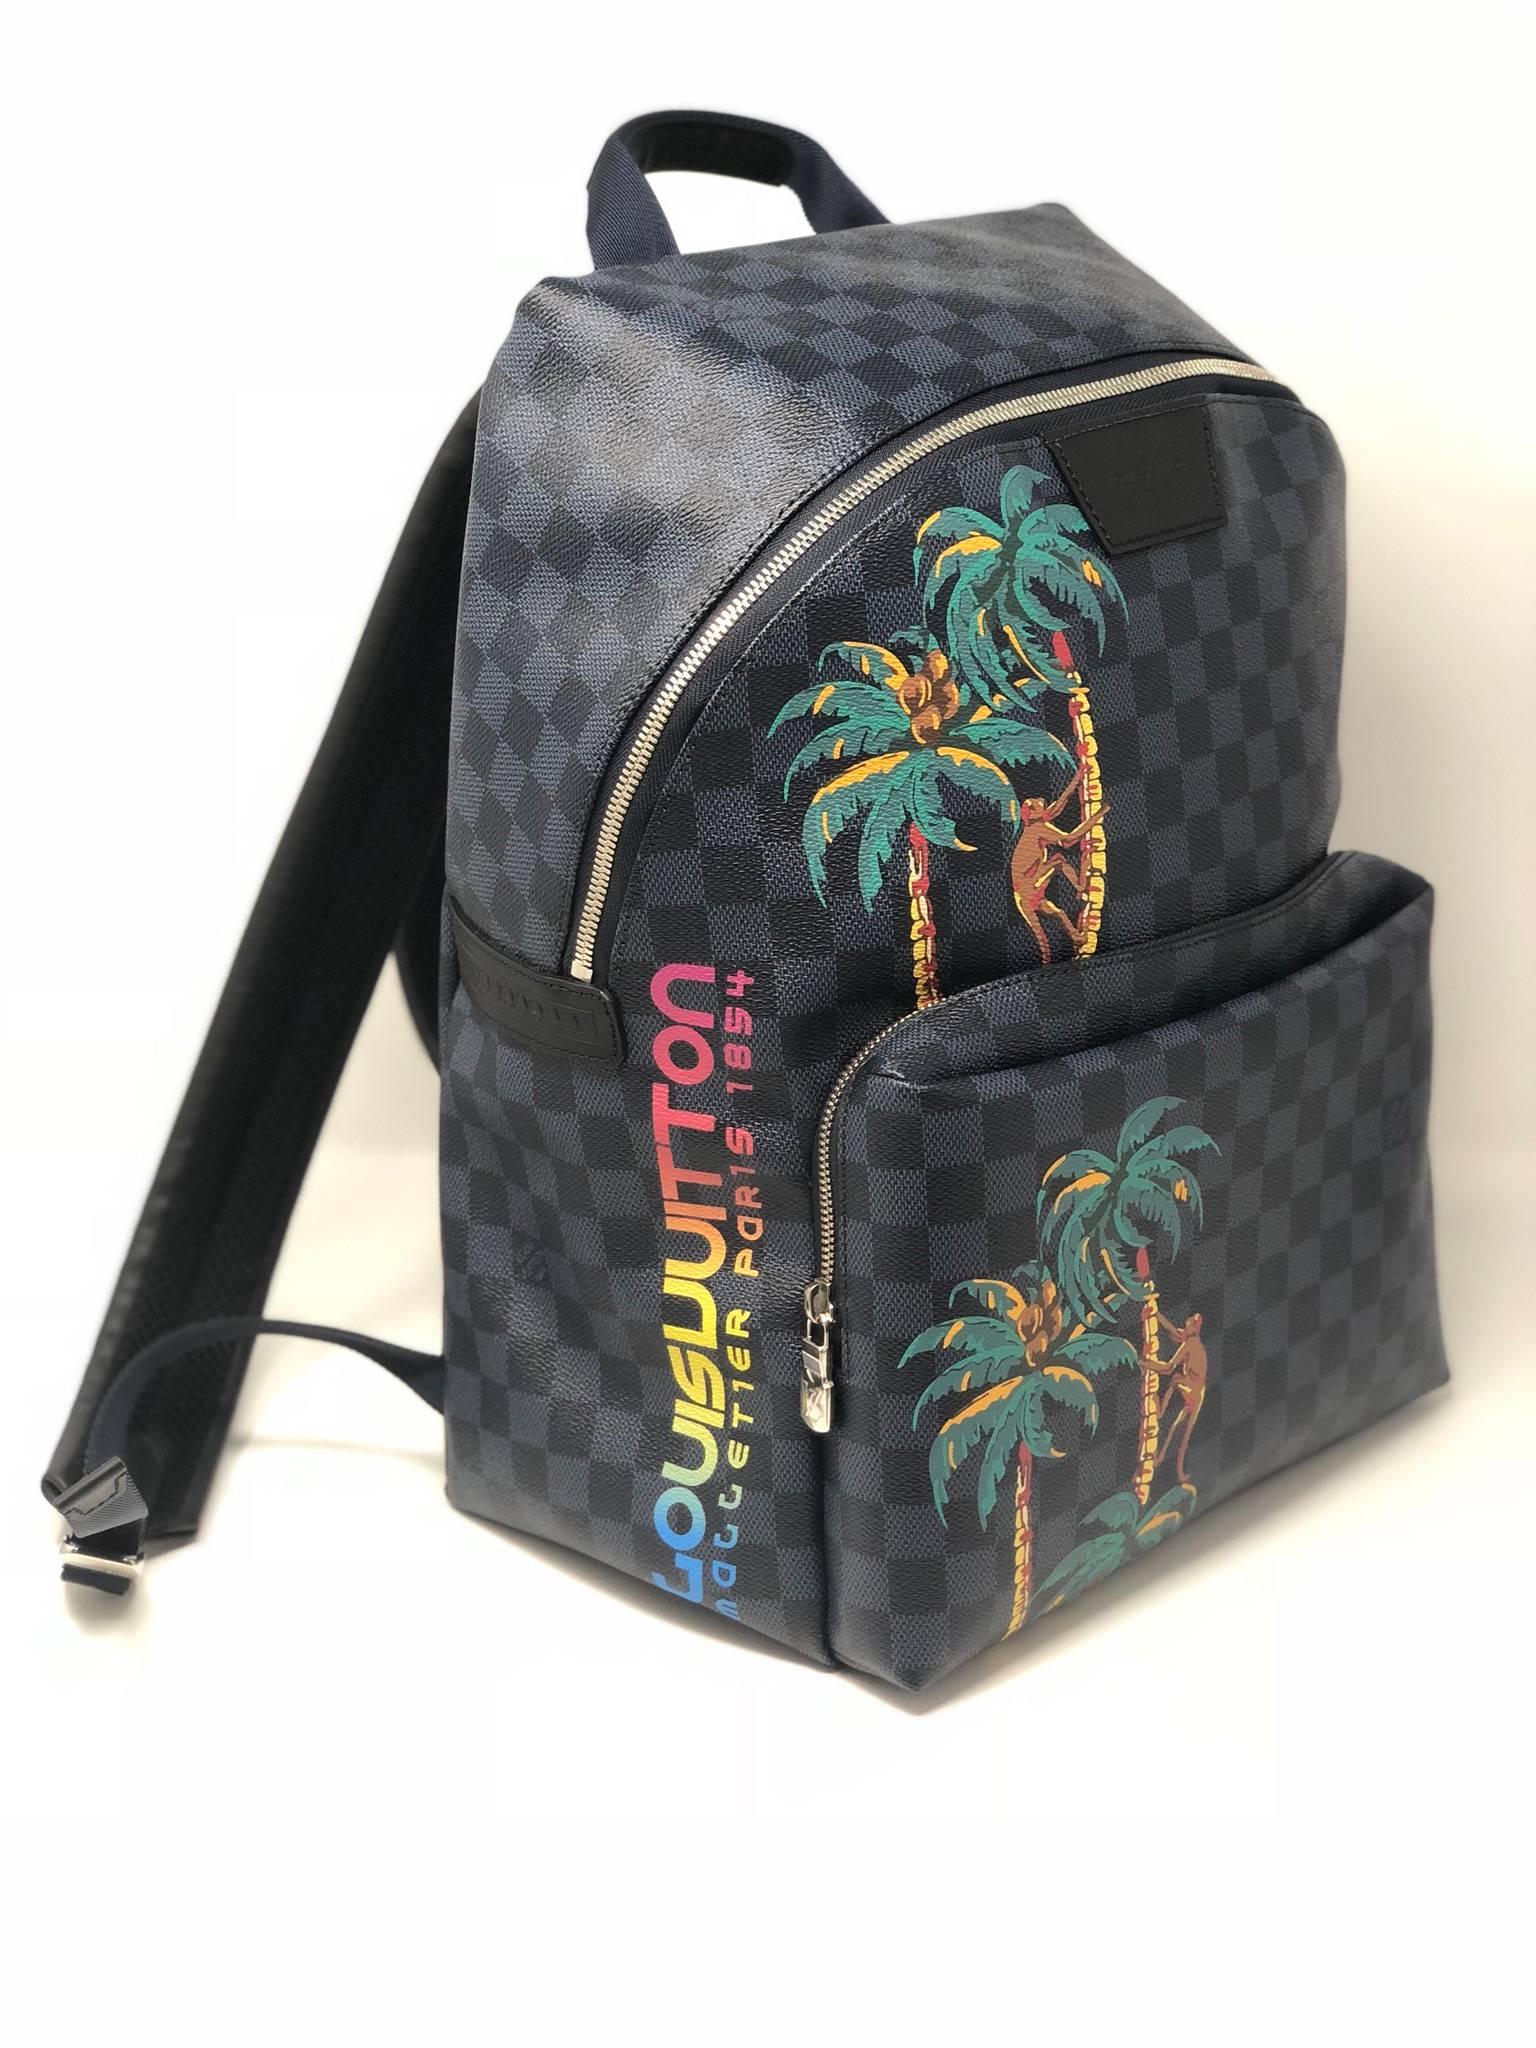 LV Apollo Backpack in Cobalt Black. Comes from the Spring/Summer 2018 collection. In brand new condition, with silver hardware.  Two back straps are adjustable and zip closure. 